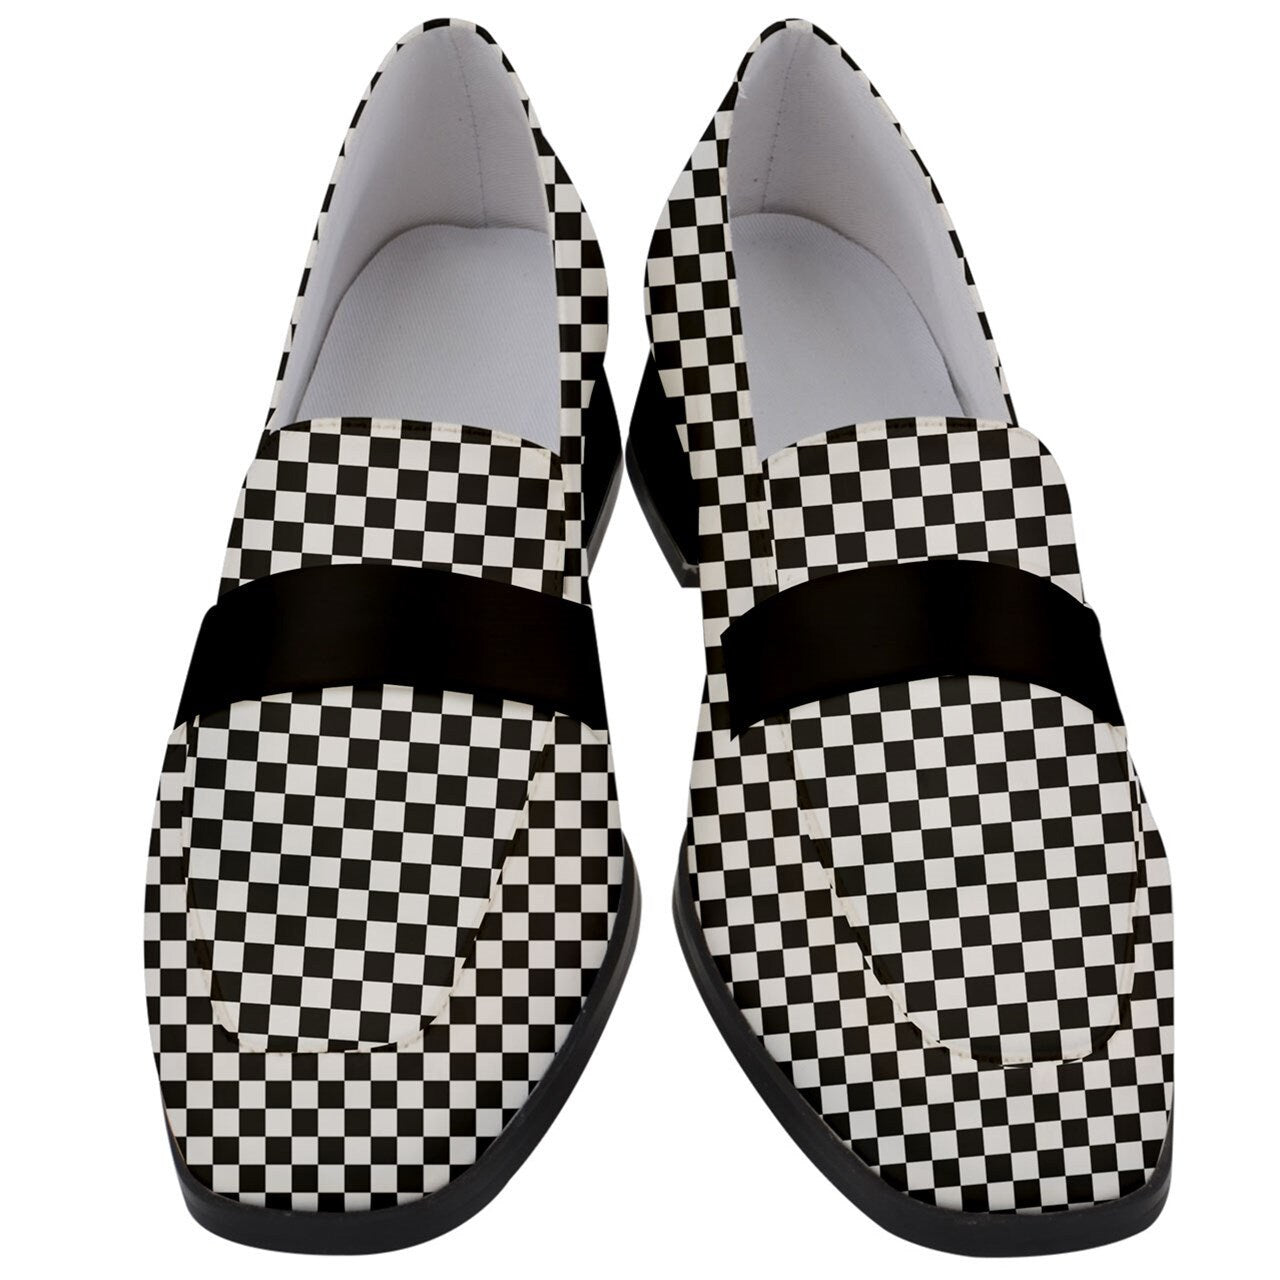 Women's Loafers, Checker Loafers,Black and White Loafers,Loafers Women,Checker Shoes,Loafers Vintage Style,Unique Loafers,Chunky Heels Women